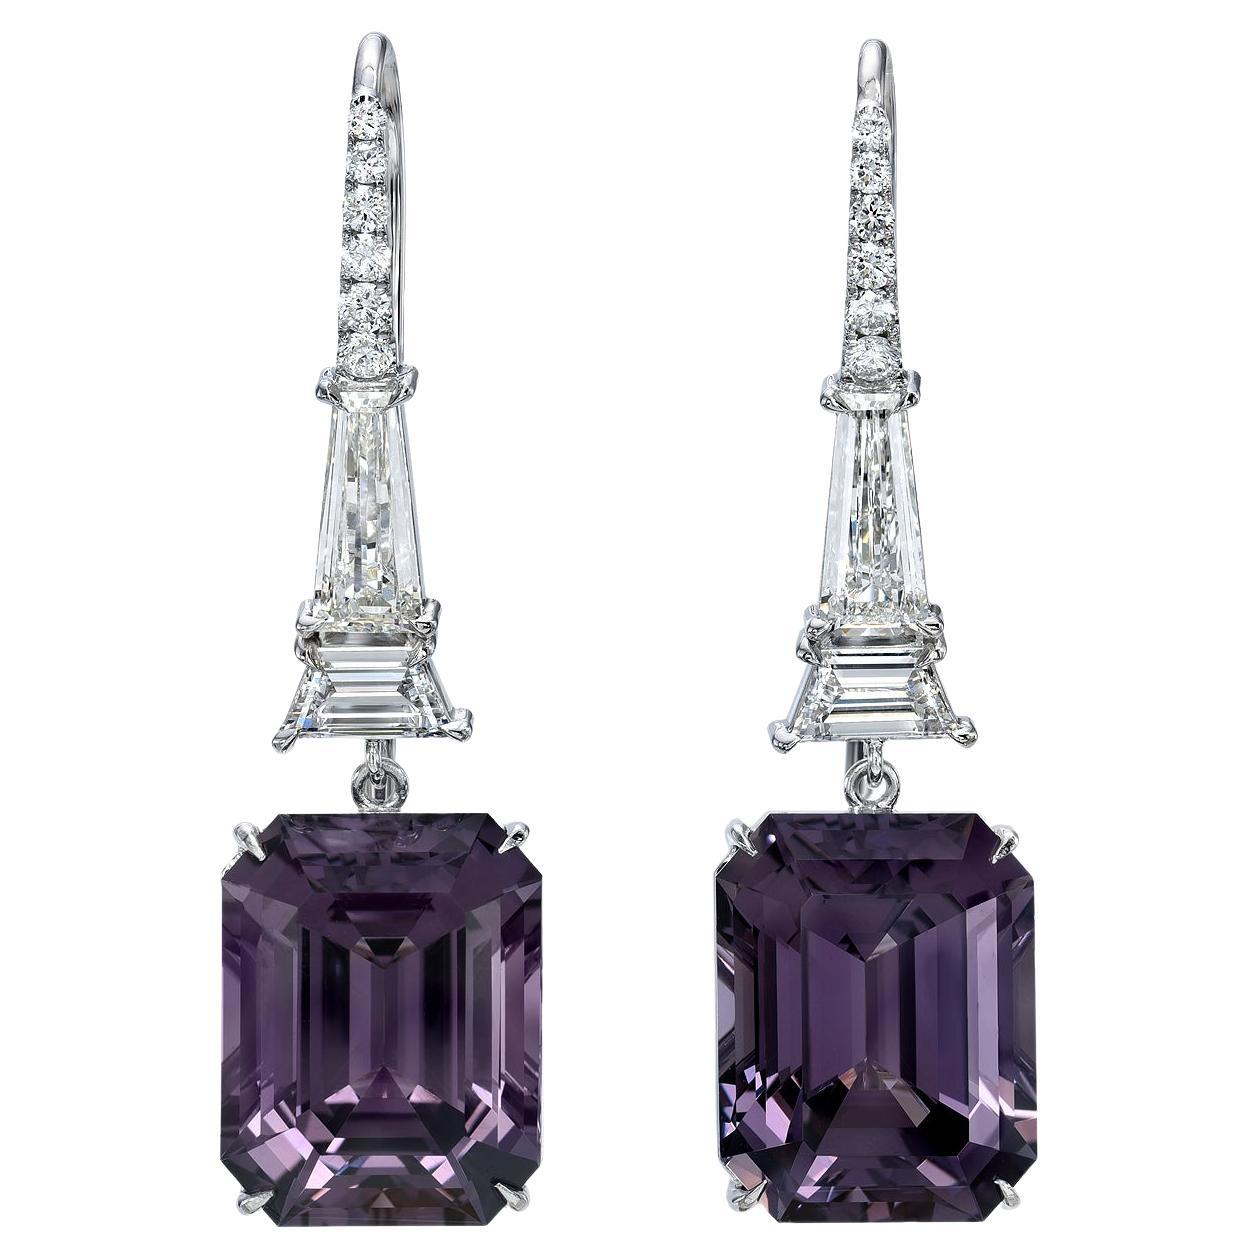 Grey Violet Spinel Earrings 13.12 Carats Emerald Cut For Sale at ...